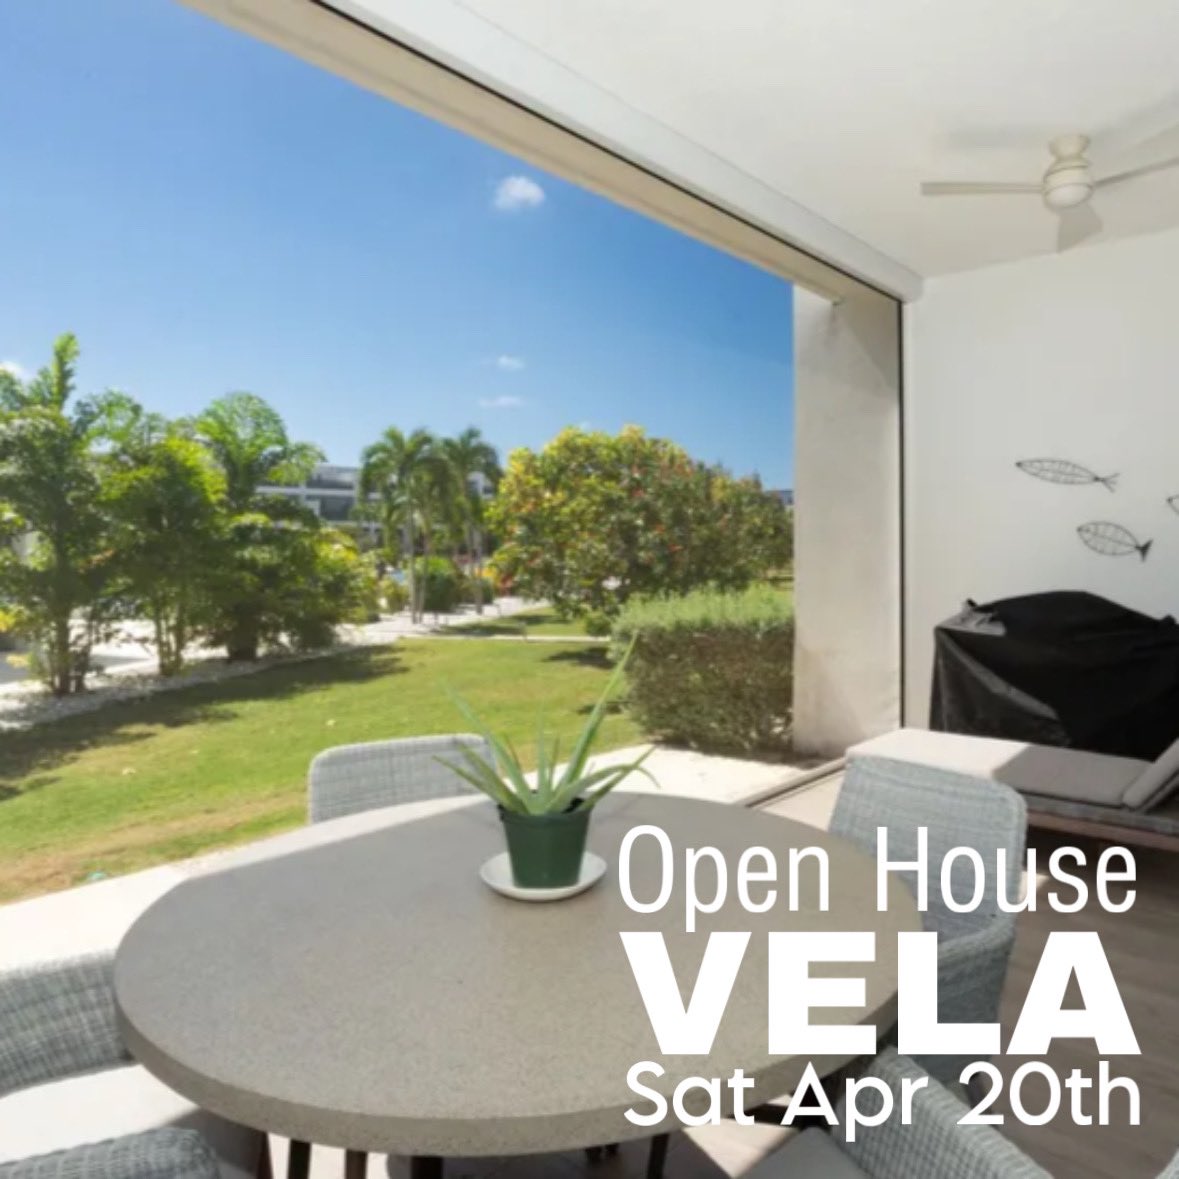 OPEN HOUSE
Sat Apr 20th • 12-2pm
New Listing
Vela, South Sound

The ground floor patio and the two larger balconies all enjoy the favoured morning sun

Member of CIREBA
MLS # 417501

#NewListing #OpenHouse #Scuba
#CaymanRealEstate #caymansothebysrealty #caymanislandsrealestate